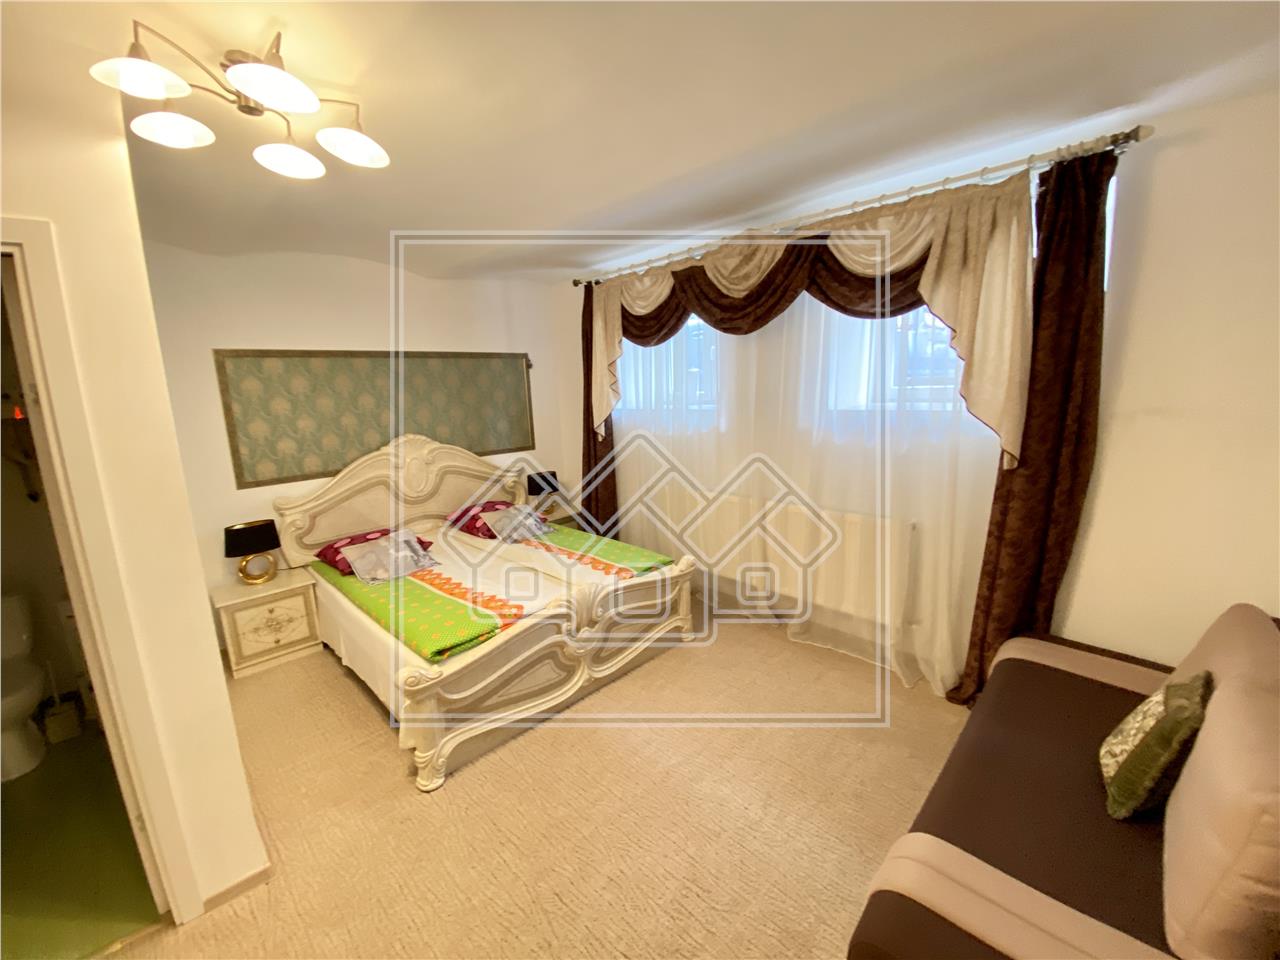 Apartment for rent in Sibiu - central area - 2 rooms - 2 bathrooms